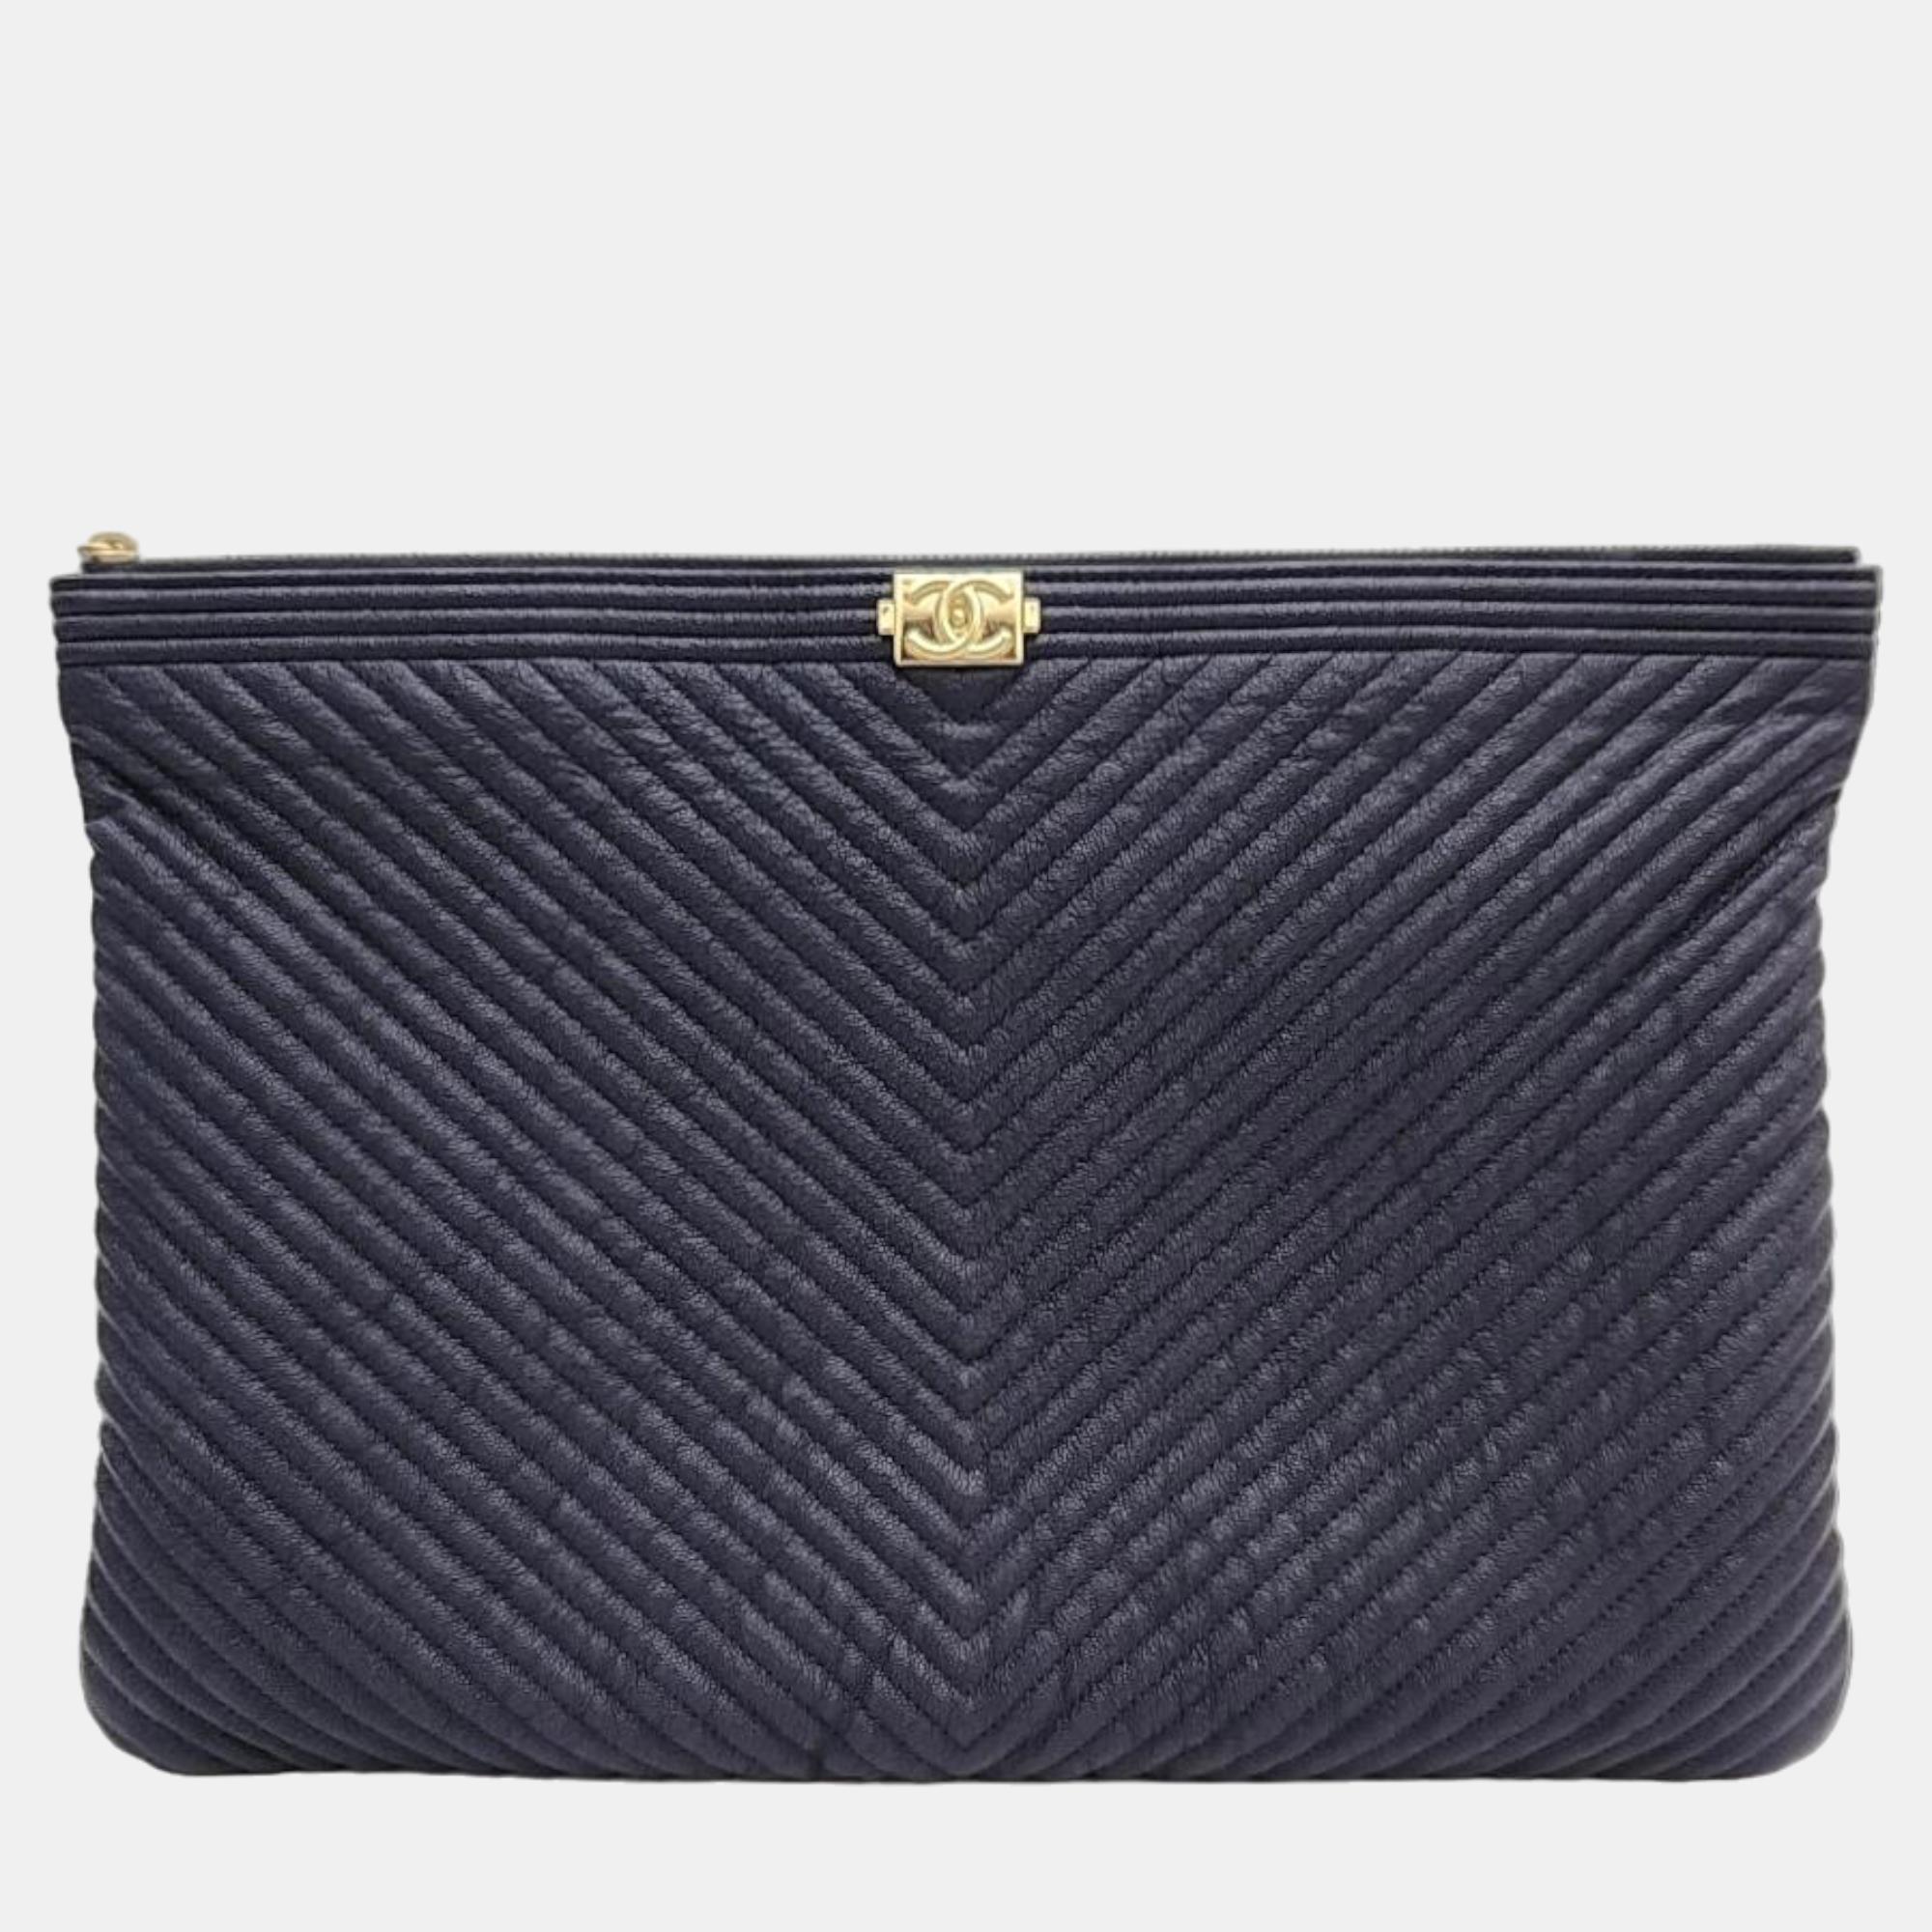 Pre-owned Chanel Navy Blue Caviar Leather Large O Case Boy Clutch Bag